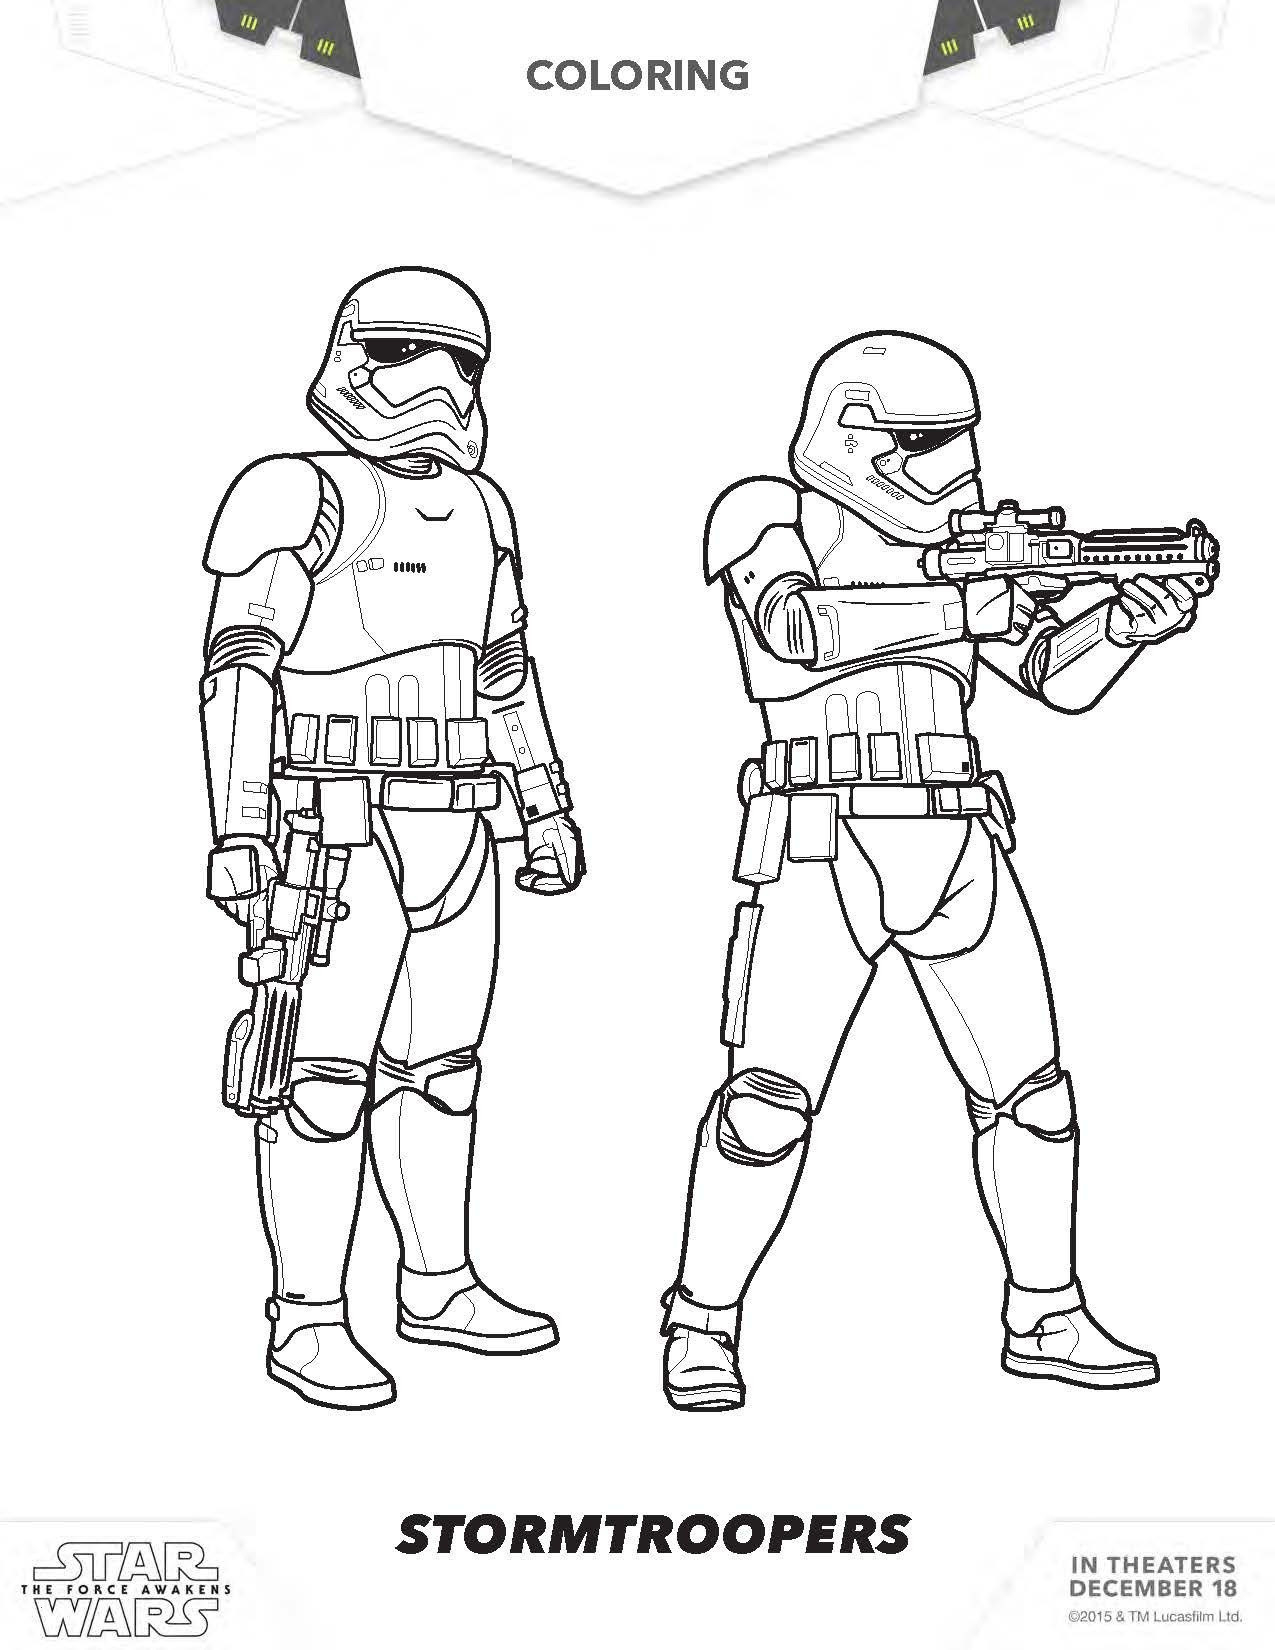 Boba Fett Coloring Page Unique Boba Fett Coloring Sheet Awesome 26 Printable Star Wars